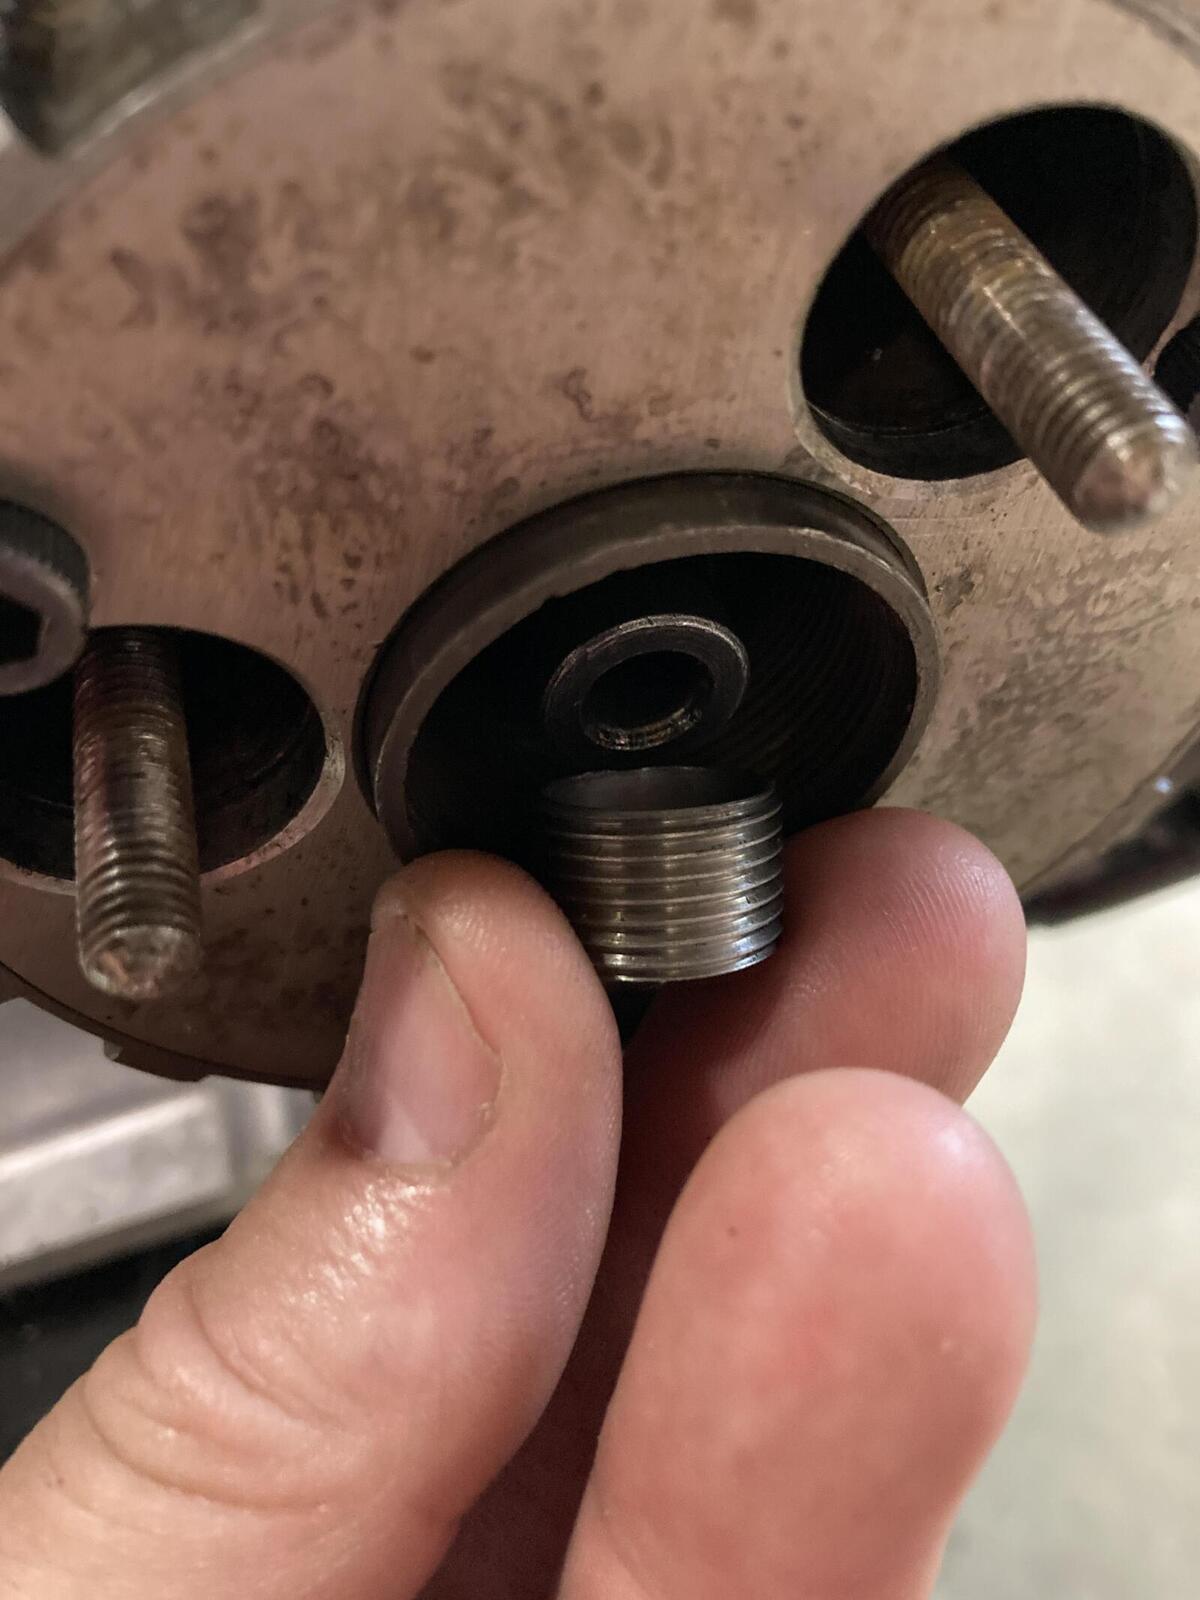 Who has successfully installed a clutch rod seal on Atlas or N15?